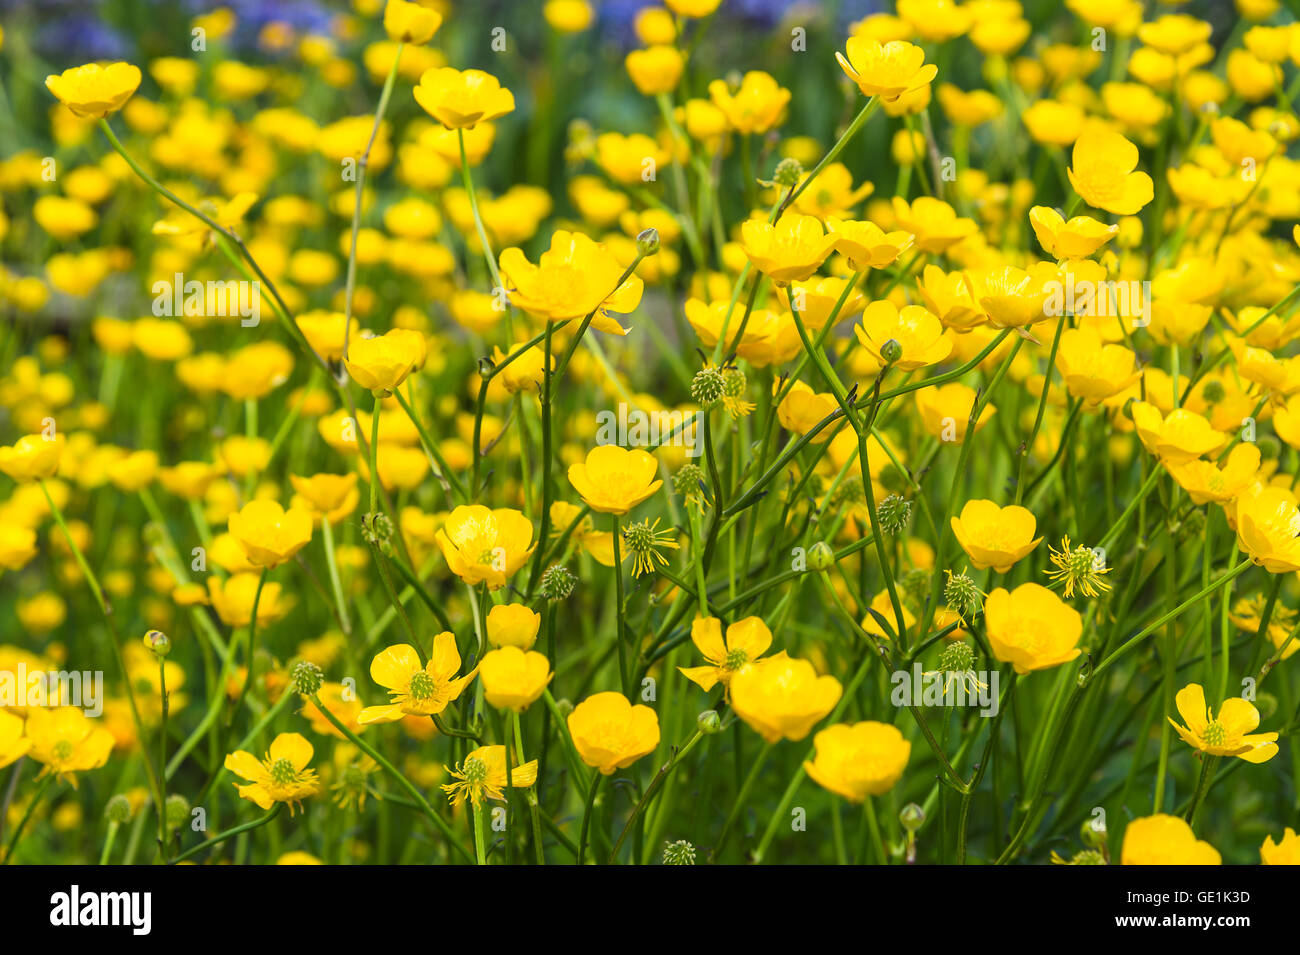 Lawn of the buttercup flower, selective focus Stock Photo